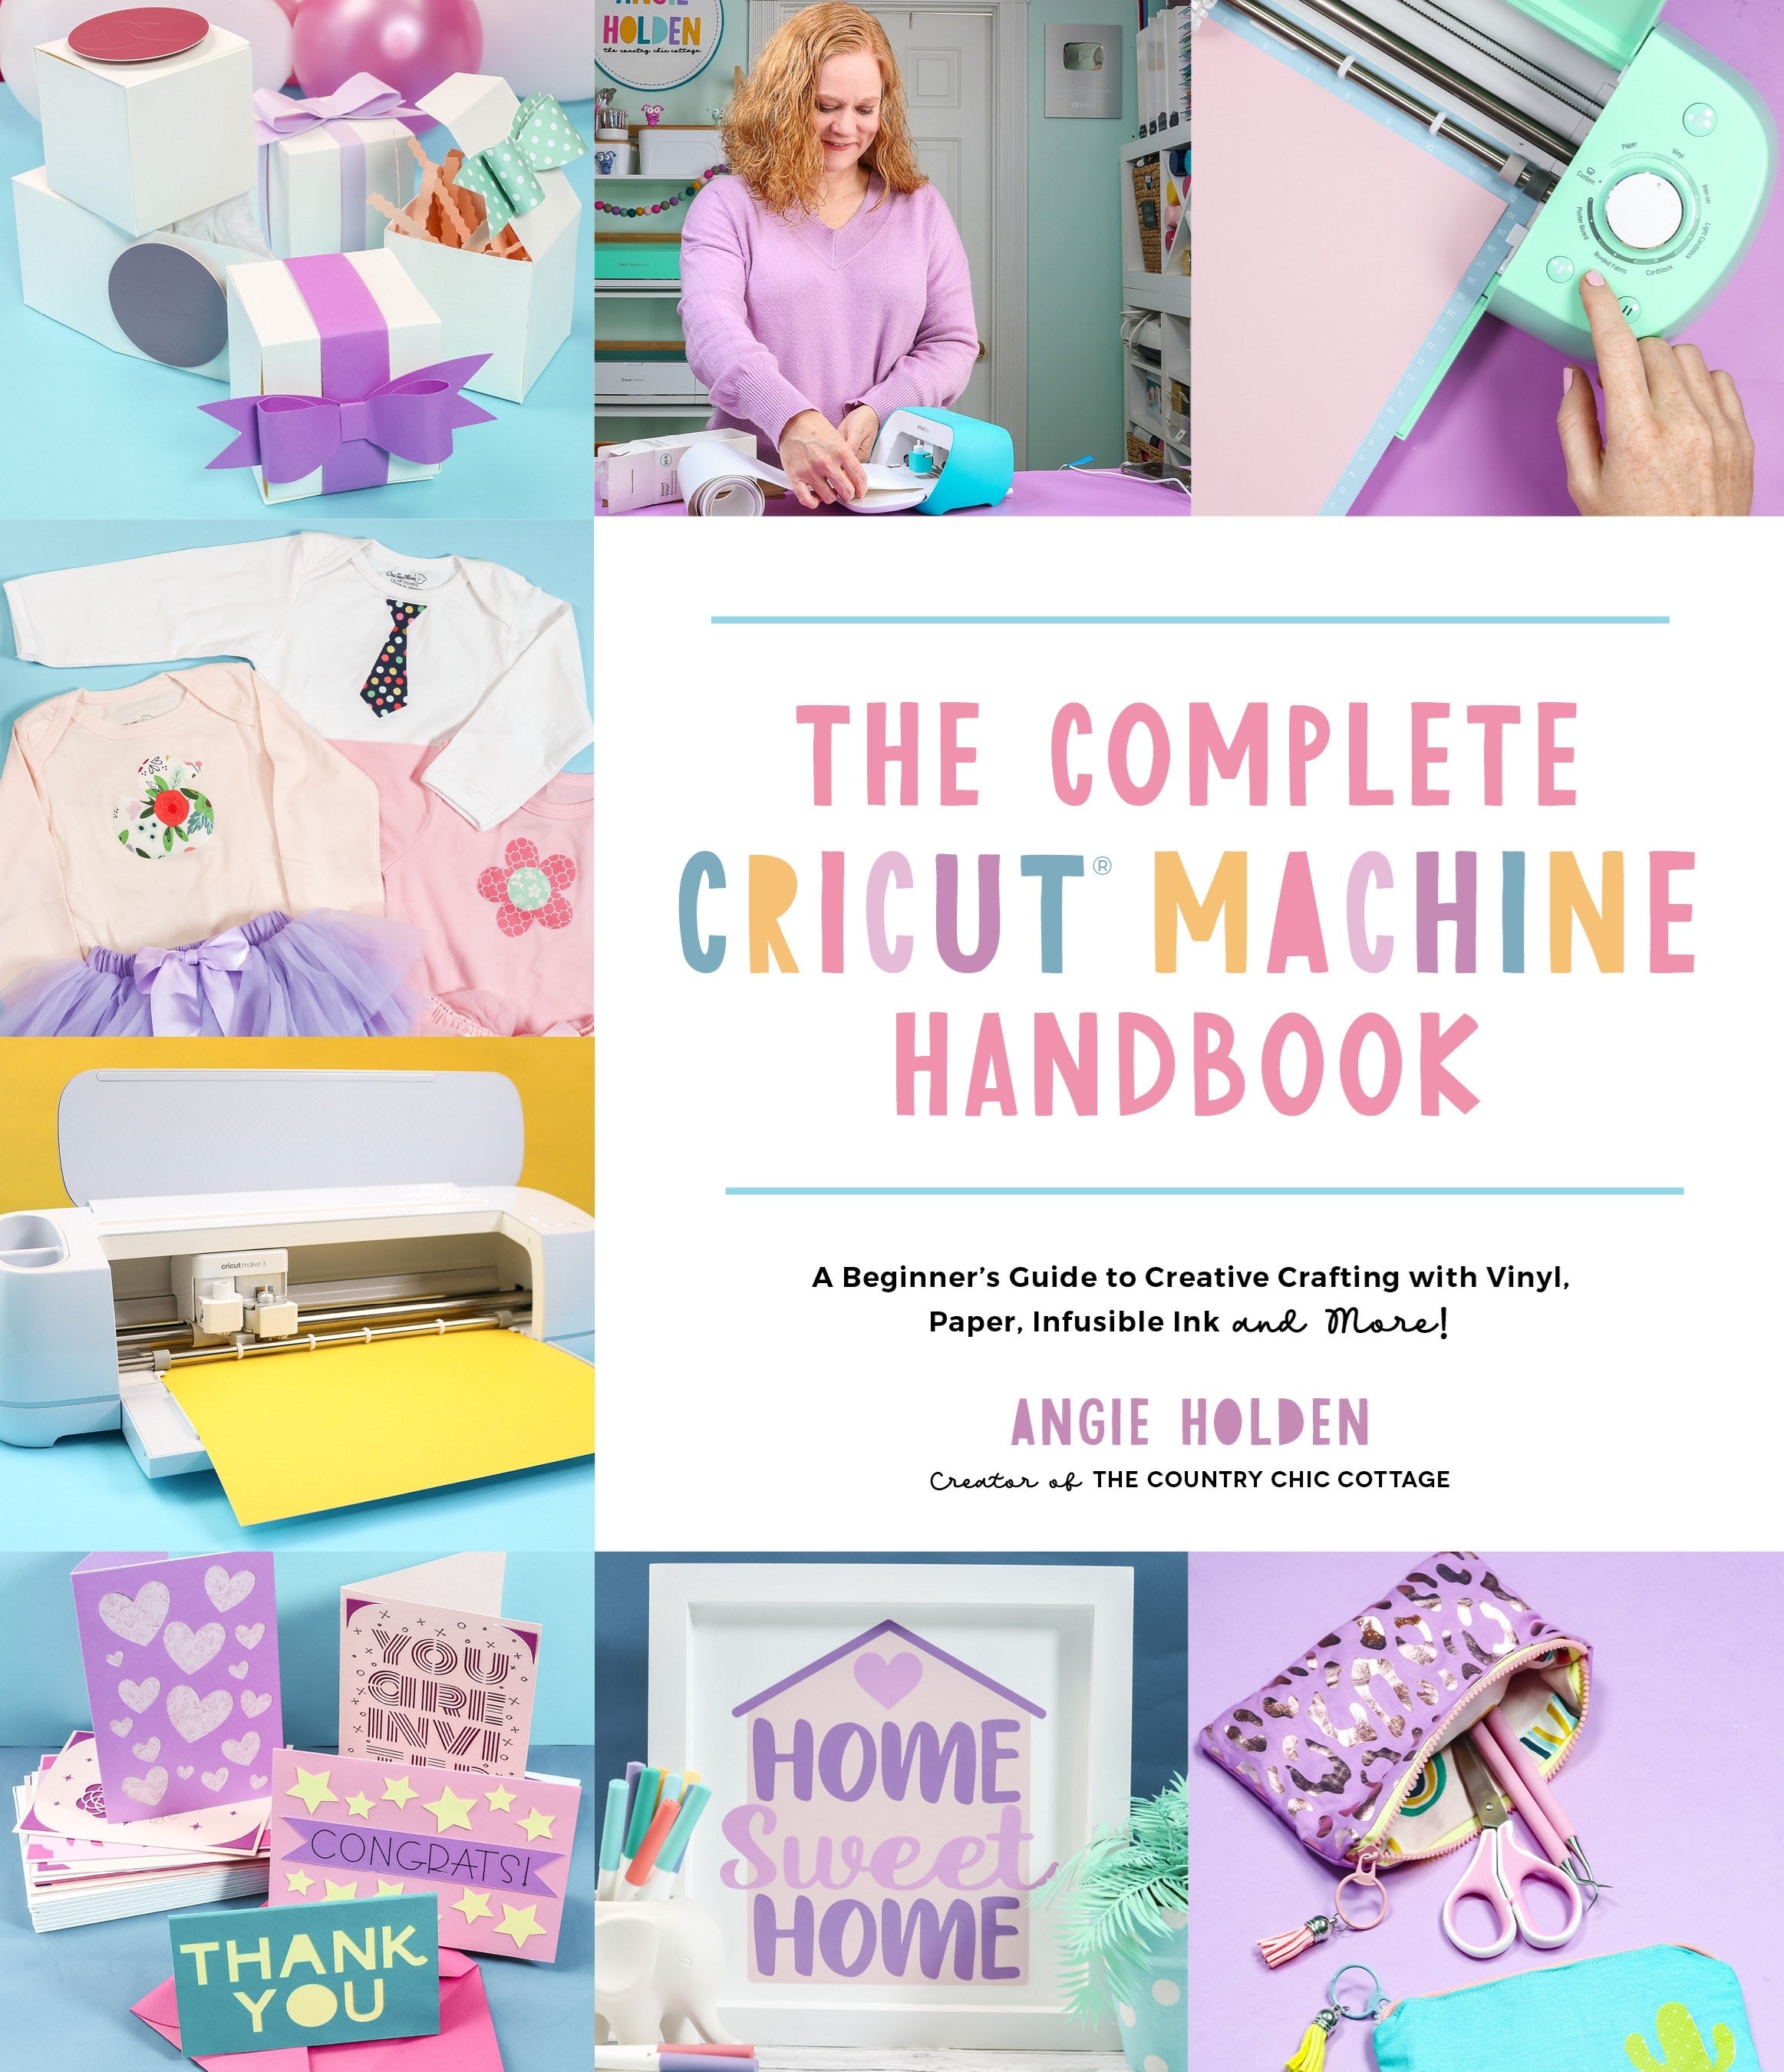 The Complete Cricut Machine Handbook: A Beginner’s Guide to Creative Crafting with Vinyl, Paper, Infusible Ink and More!